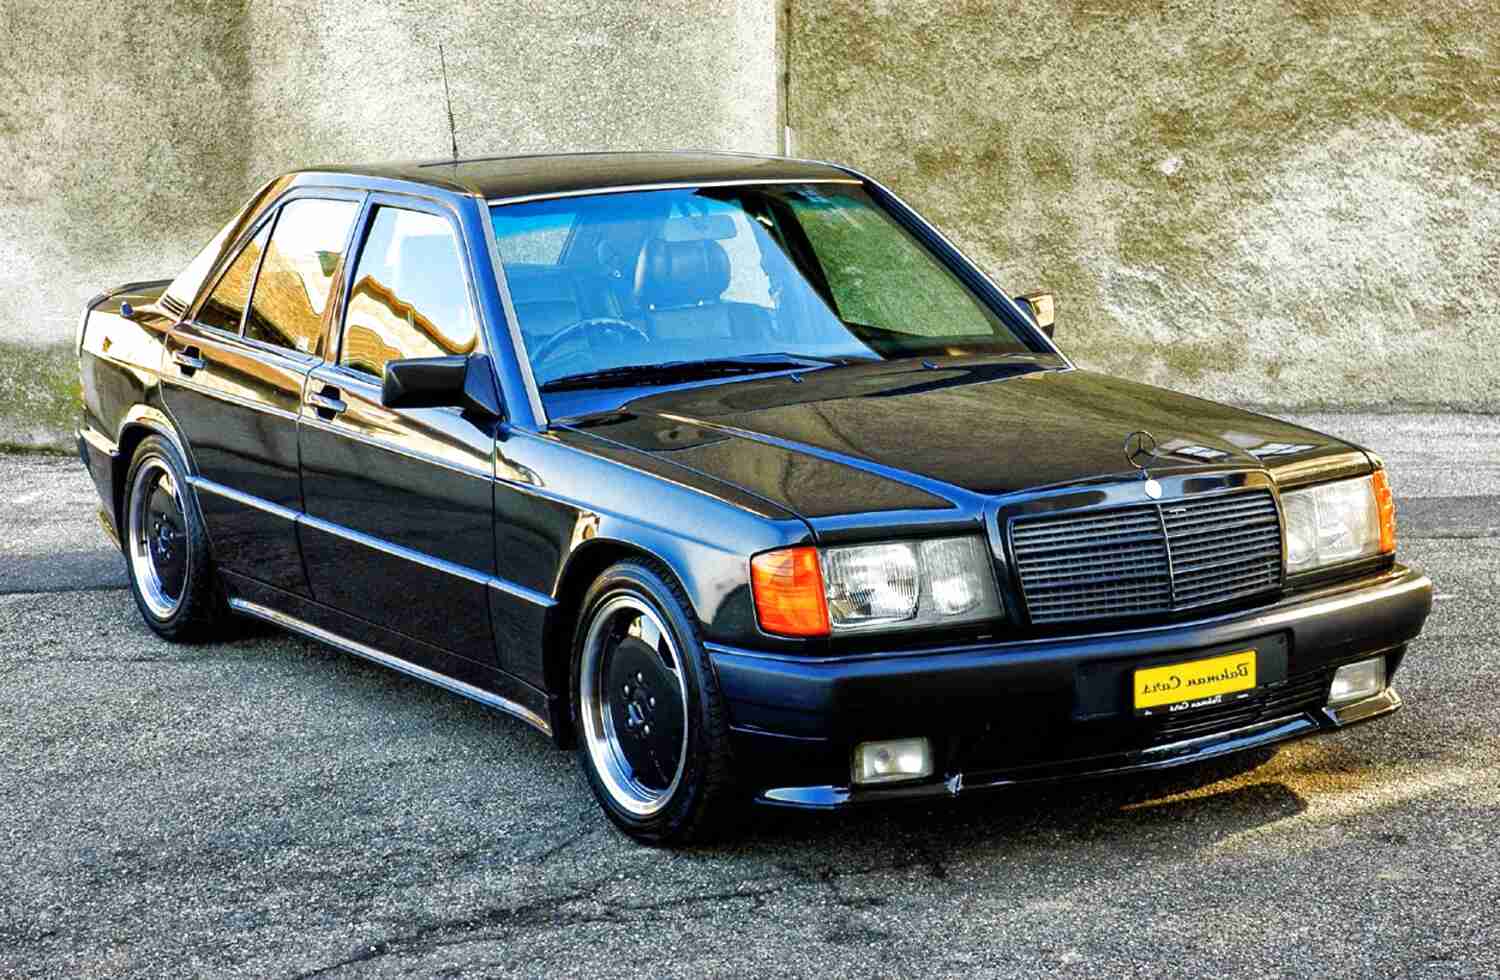 Mercedes 190 Amg for sale in UK | 62 used Mercedes 190 Amgs